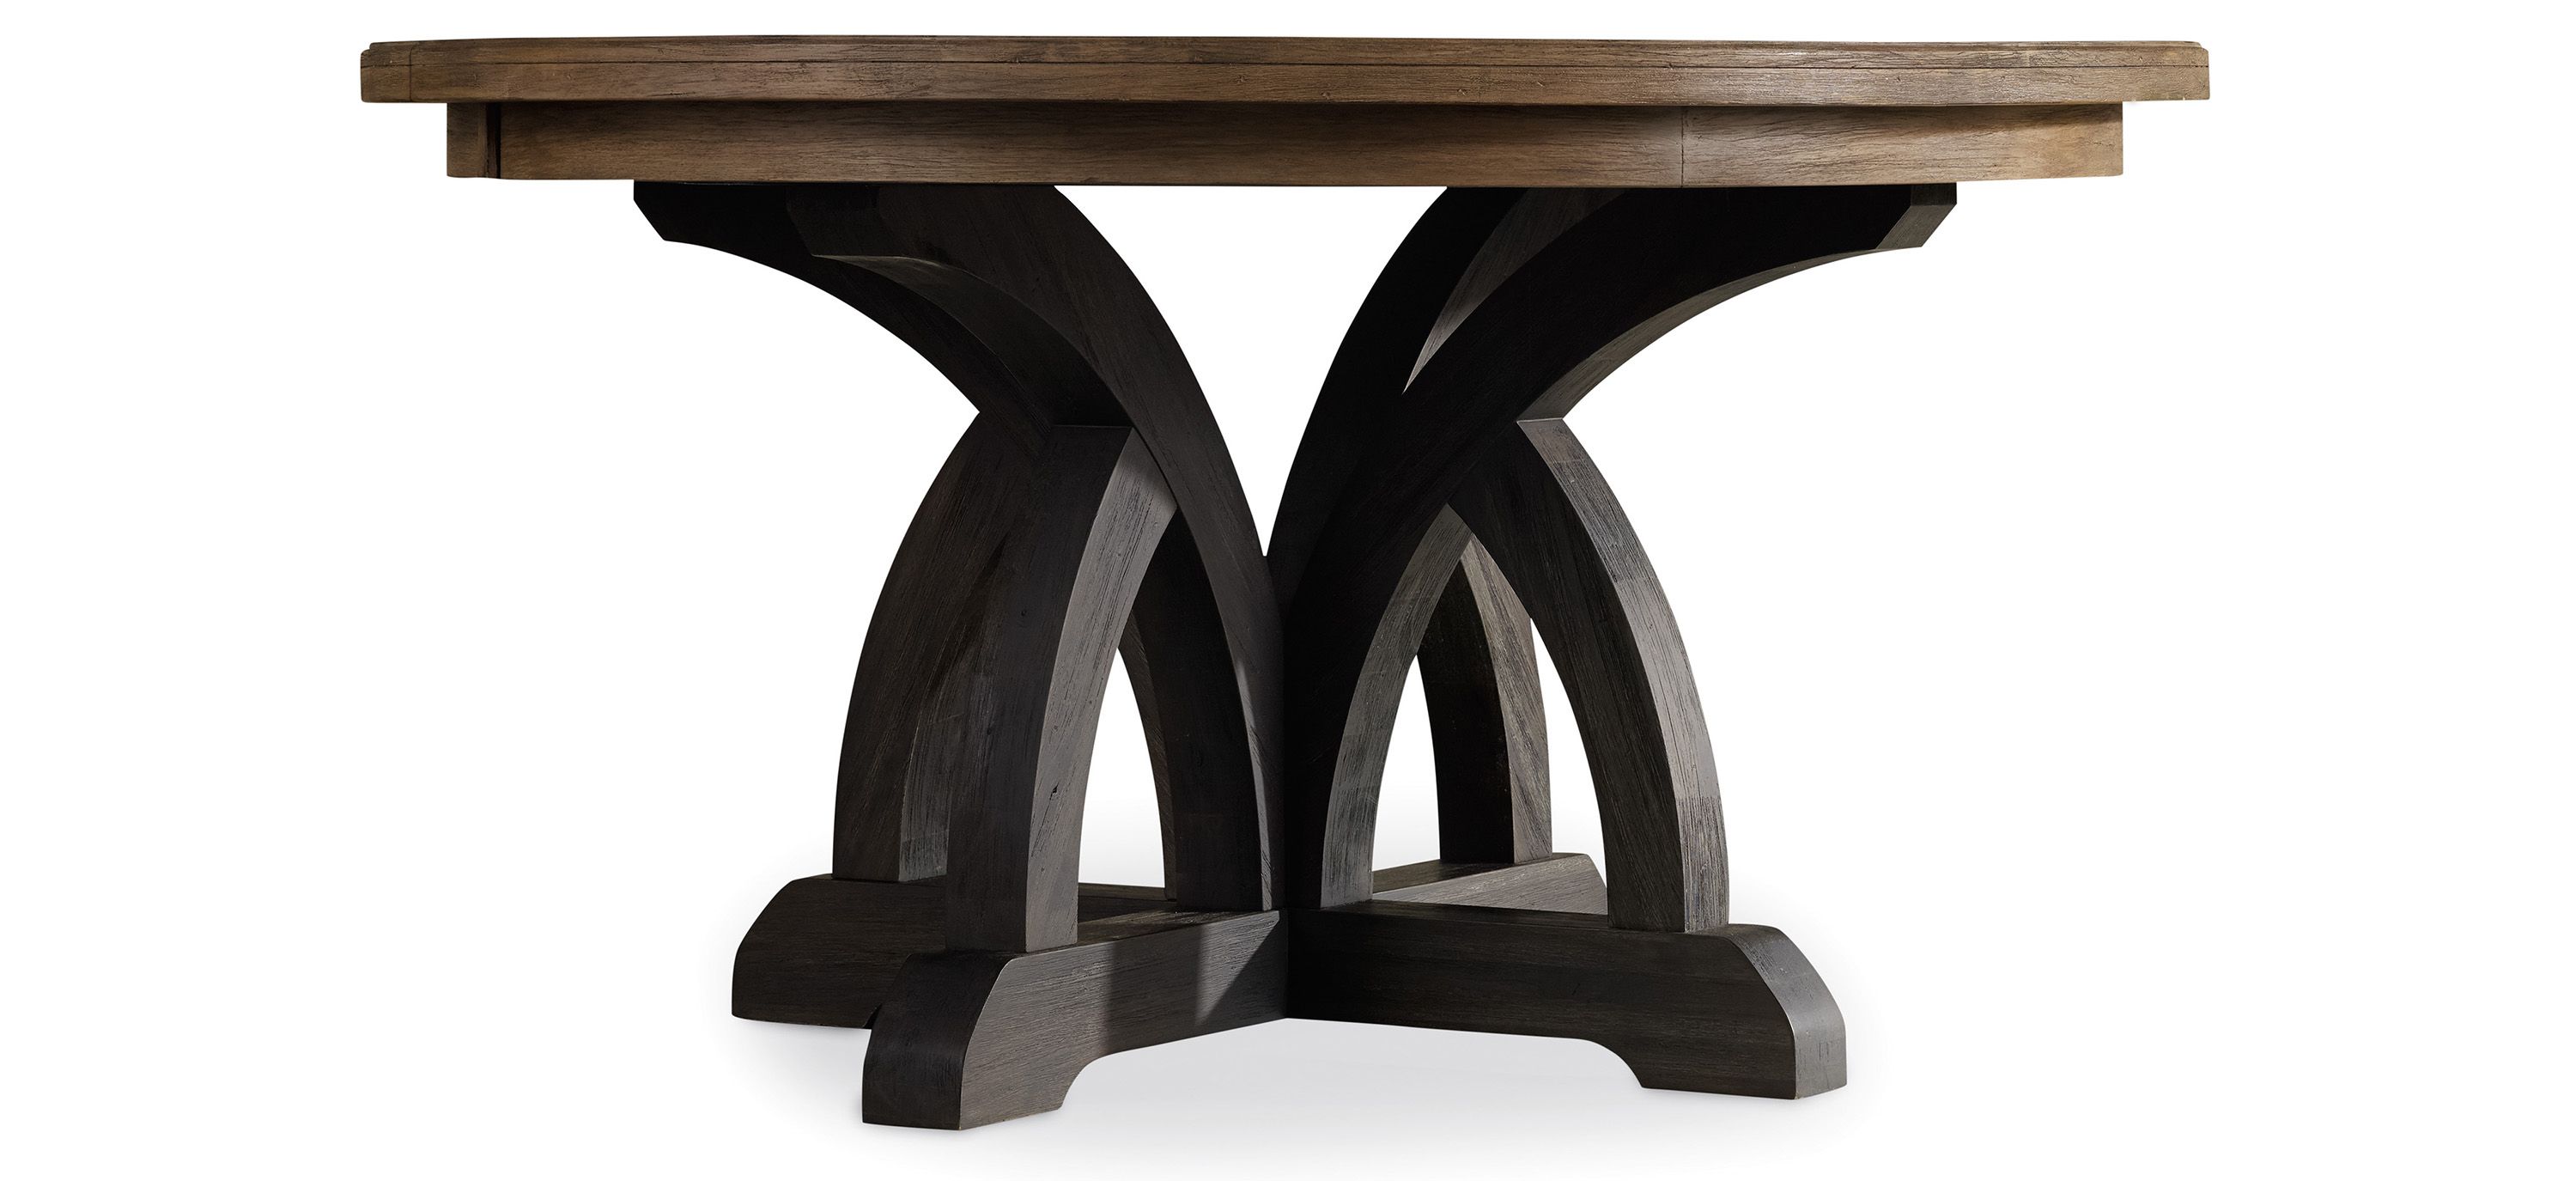 Corsica Round Dining Table with Leaf